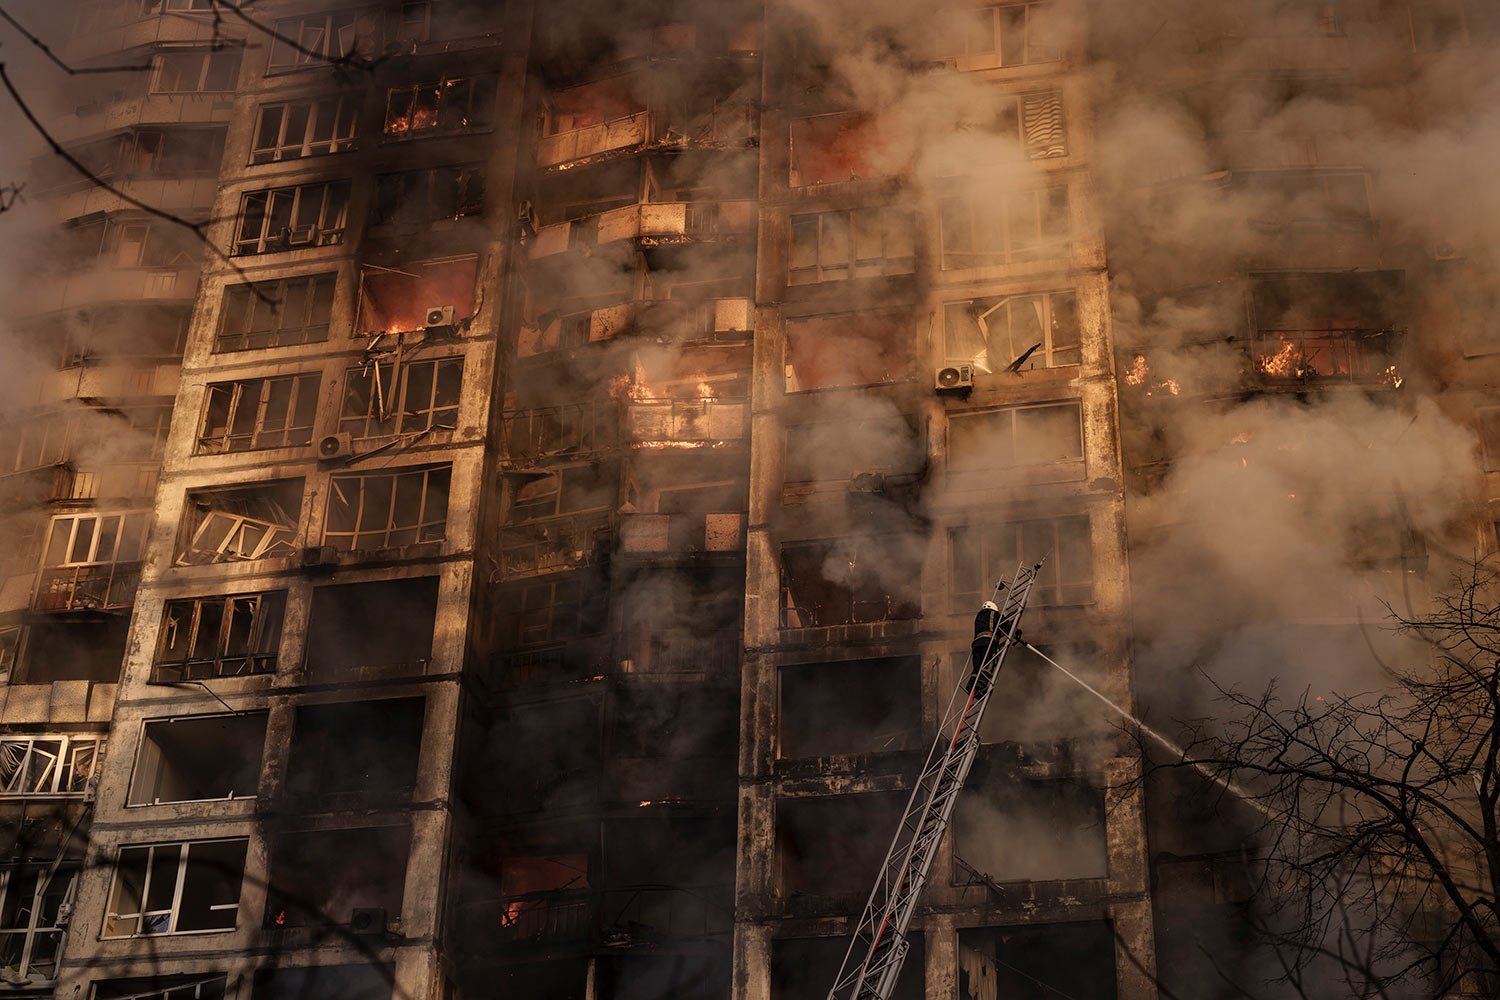  Ukrainian firefighters work at an apartment building after bombing in Kyiv, Ukraine, Tuesday, March 15, 2022. (AP Photo/Felipe Dana) 